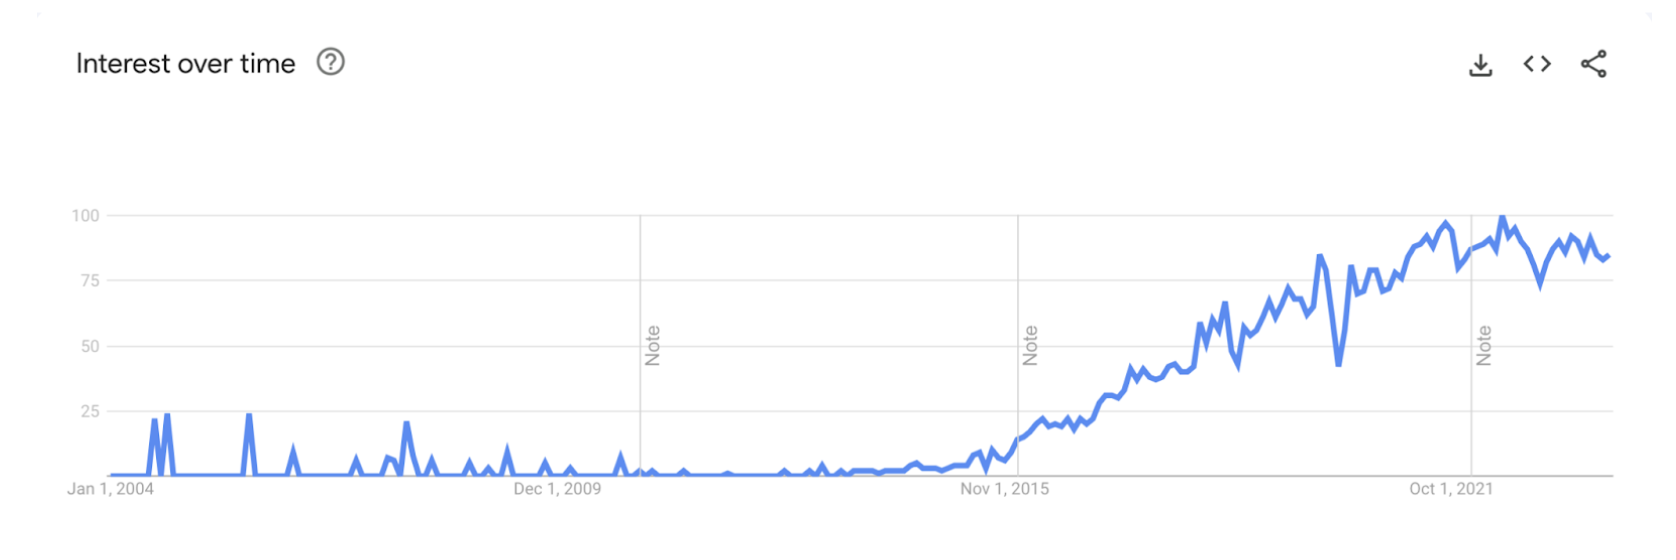 upward trendline graph for interest over time for the query “law firm near me”